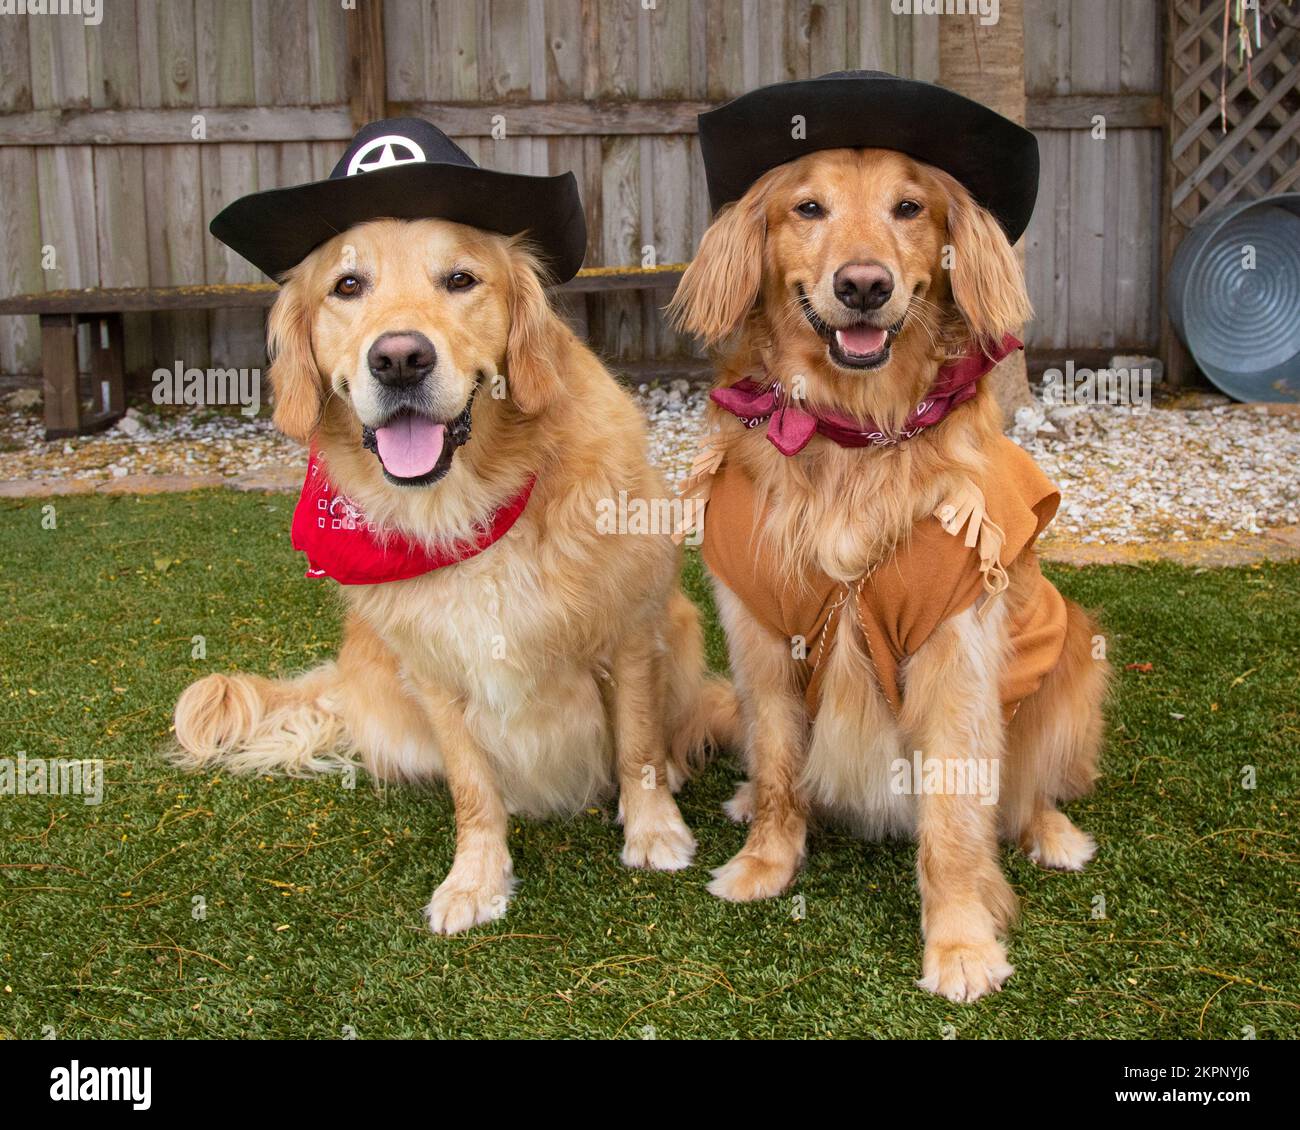 Portrait of two golden retriever dogs dressed as cowboys sitting in a garden Stock Photo